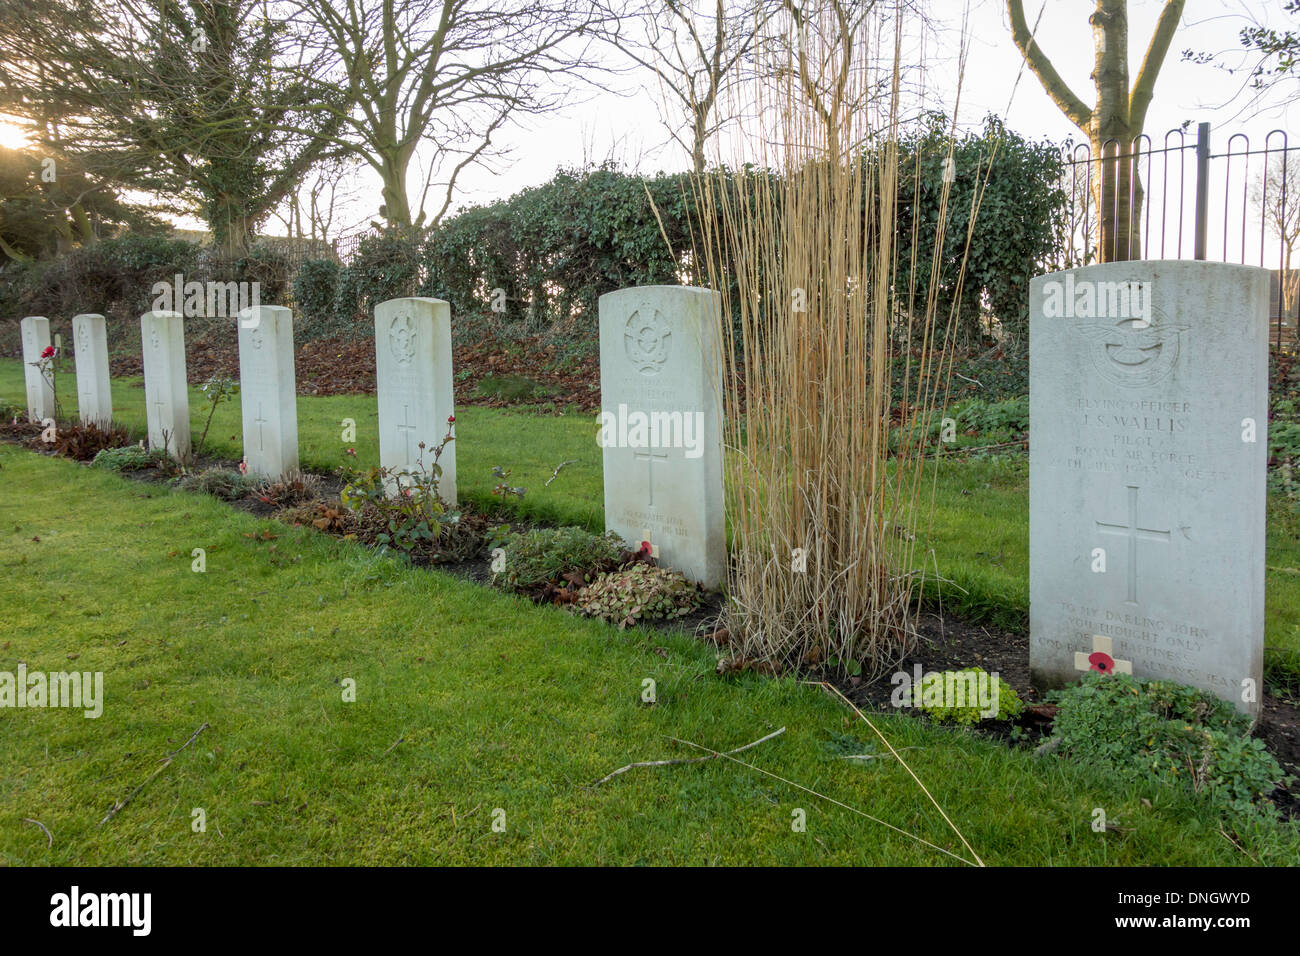 Part of row of 32 war graves of Allied Airmen killed in World War 2 and buried in churchyard at Brandesburton East Yorkshire UK Stock Photo